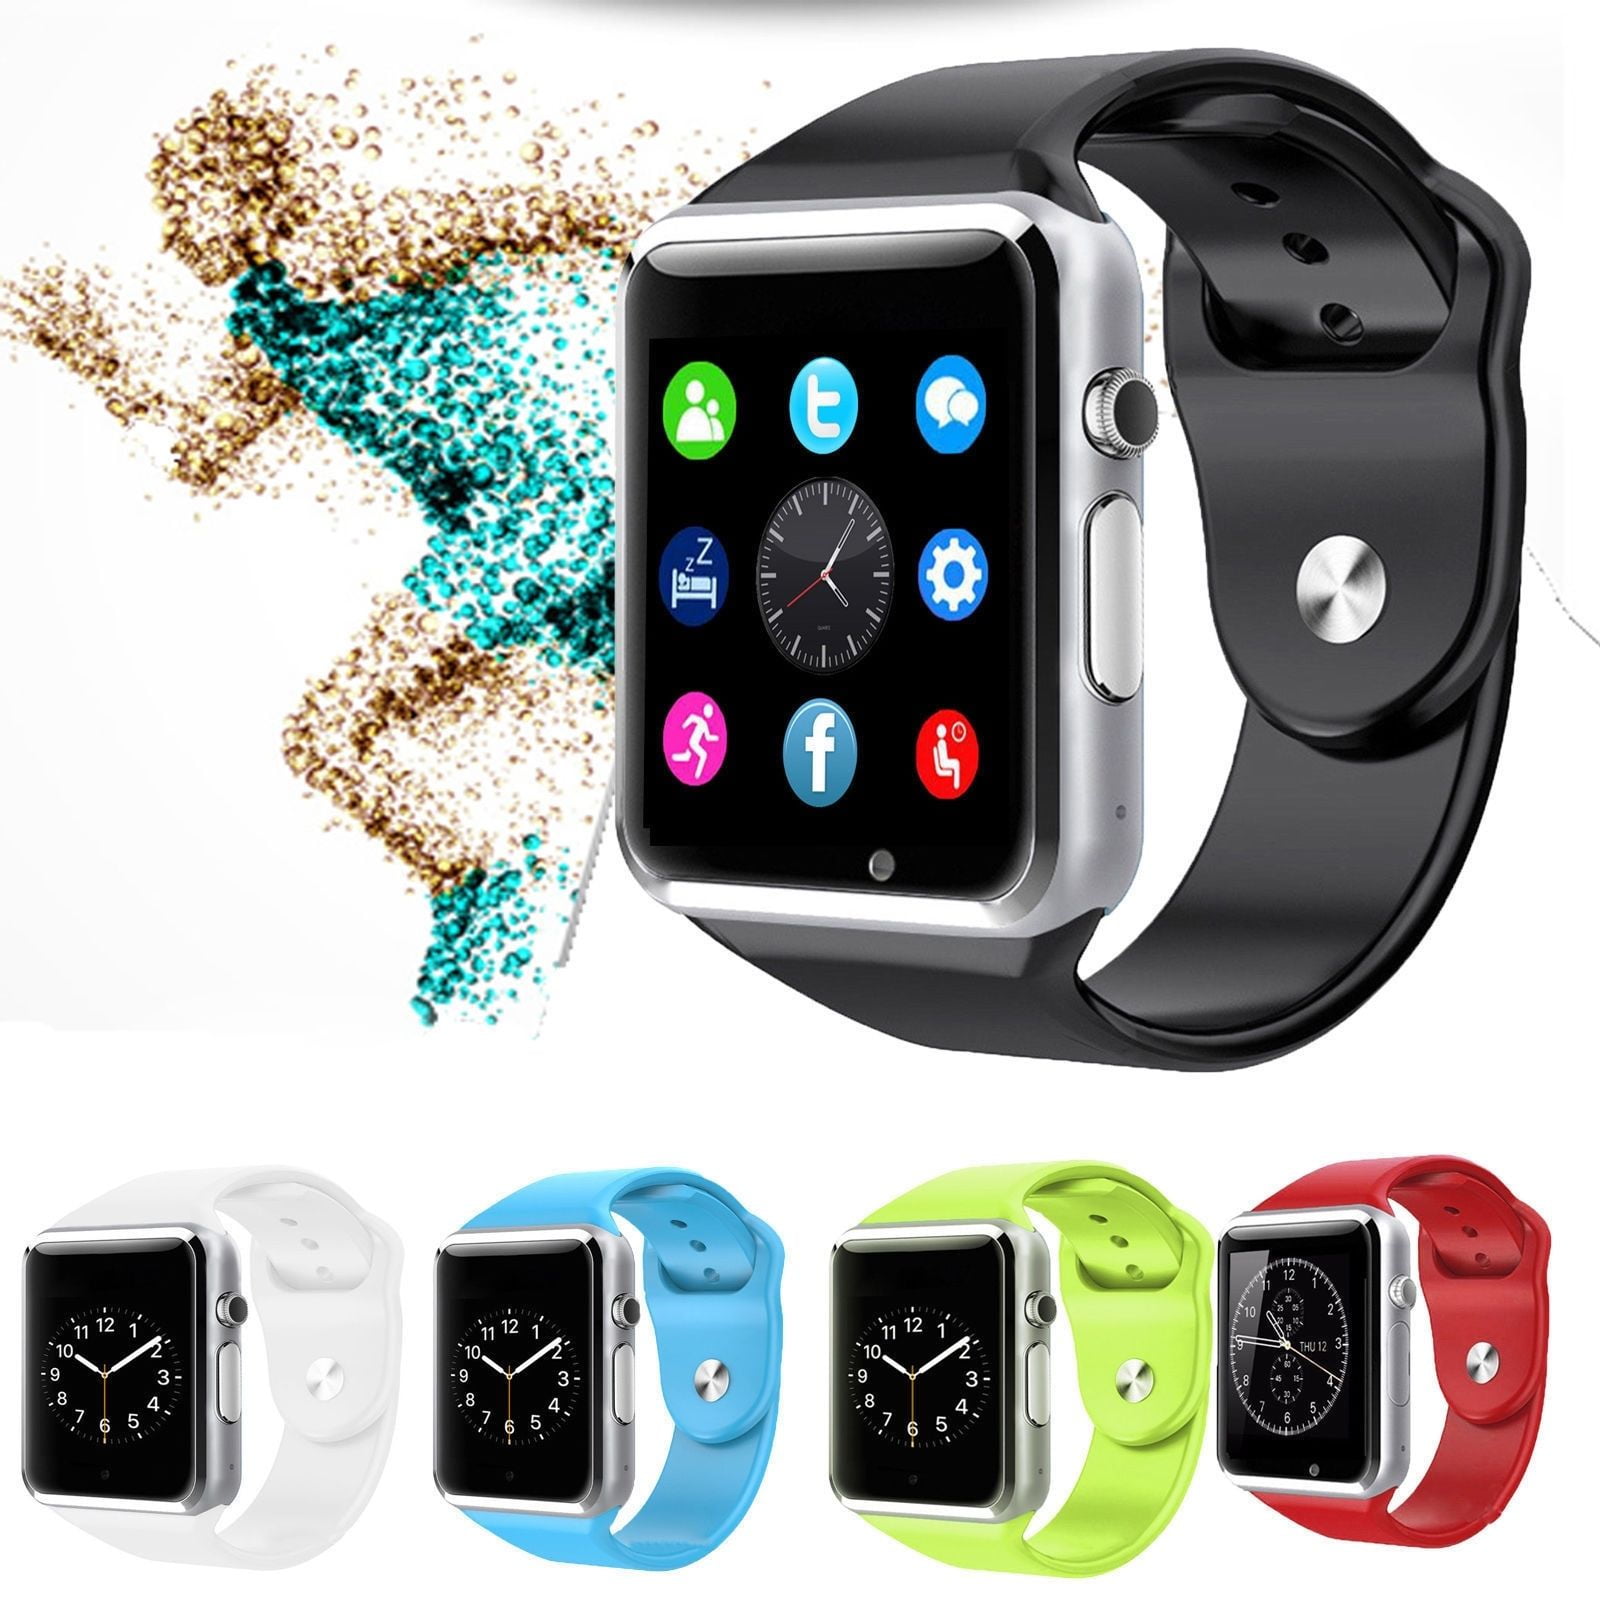 bluetooth mobile phone watch